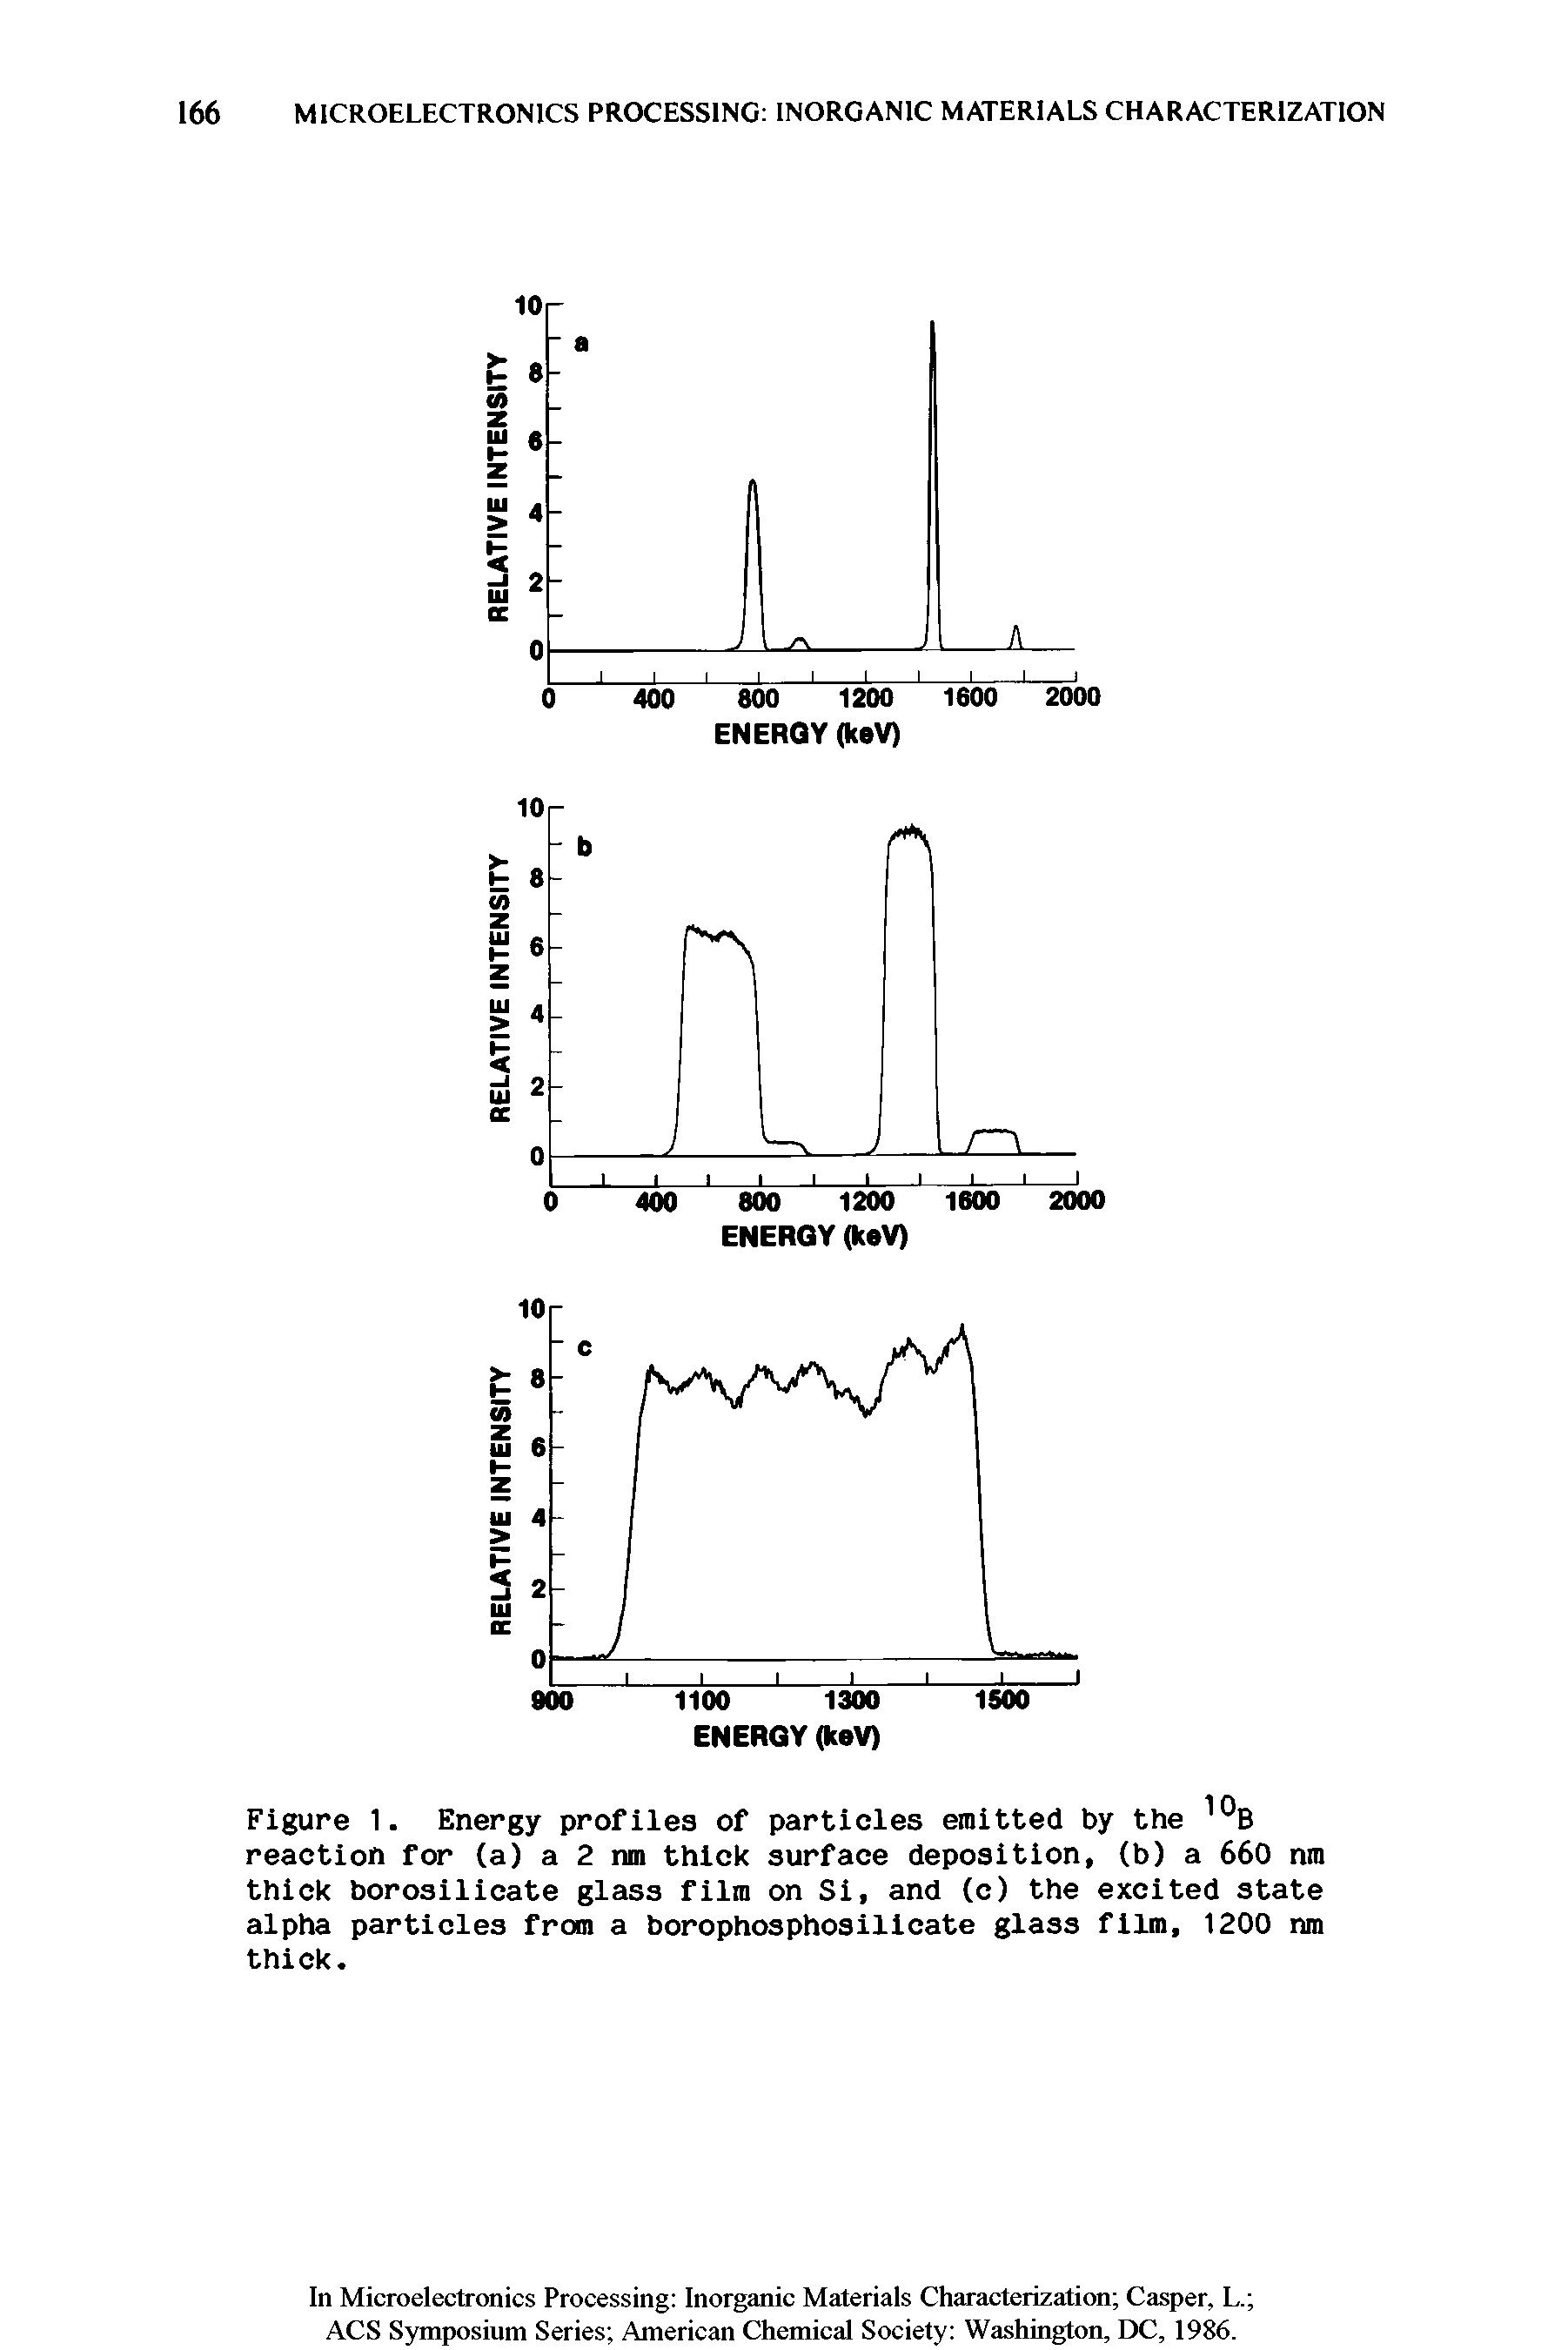 Figure 1. Energy profiles of particles emitted by the reaction for (a) a 2 nm thick surface deposition, (b) a 660 nm thick borosilicate glass film on Si, and (c) the excited state alpha particles from a borophosphosilicate glass film, 1200 nm thick.